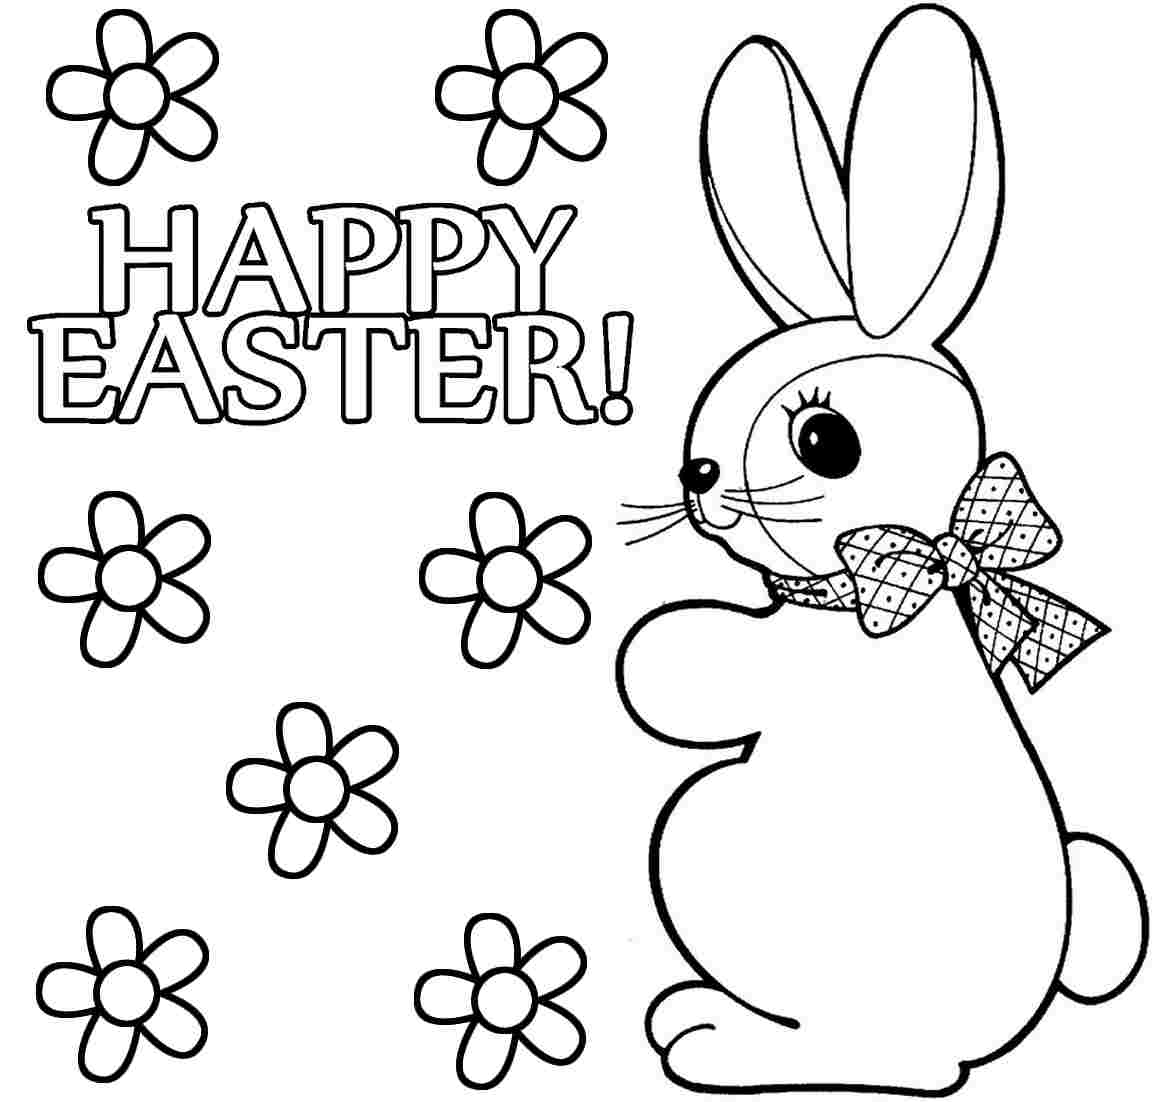 Celebrate spring with bunny coloring page